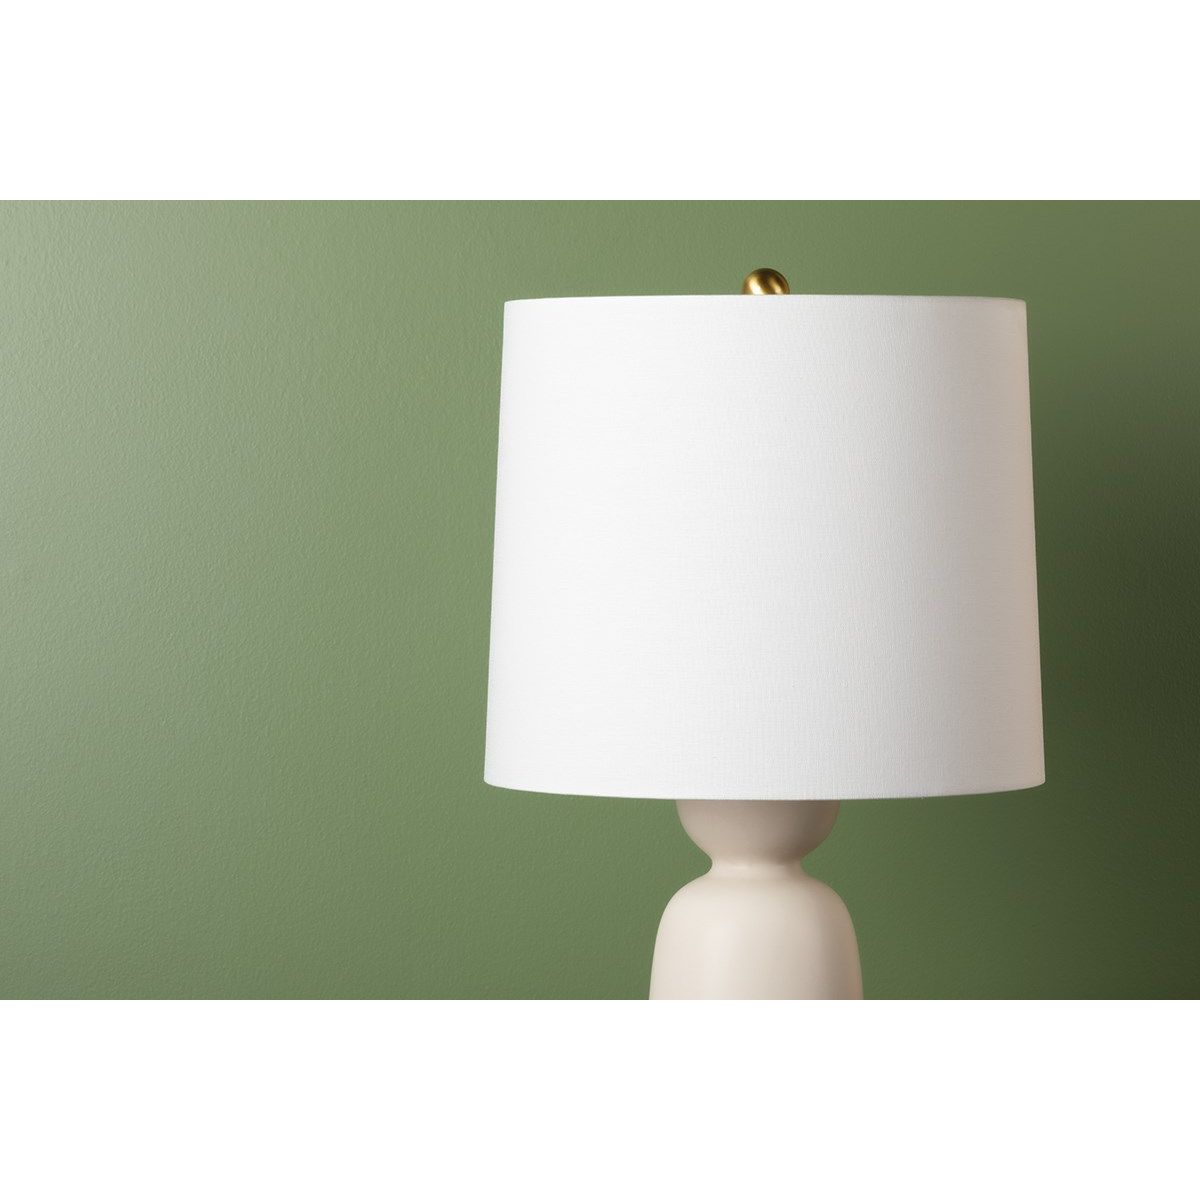 Rhea Table Lamp Ceramic Antique Ivory with Aged Brass Accents